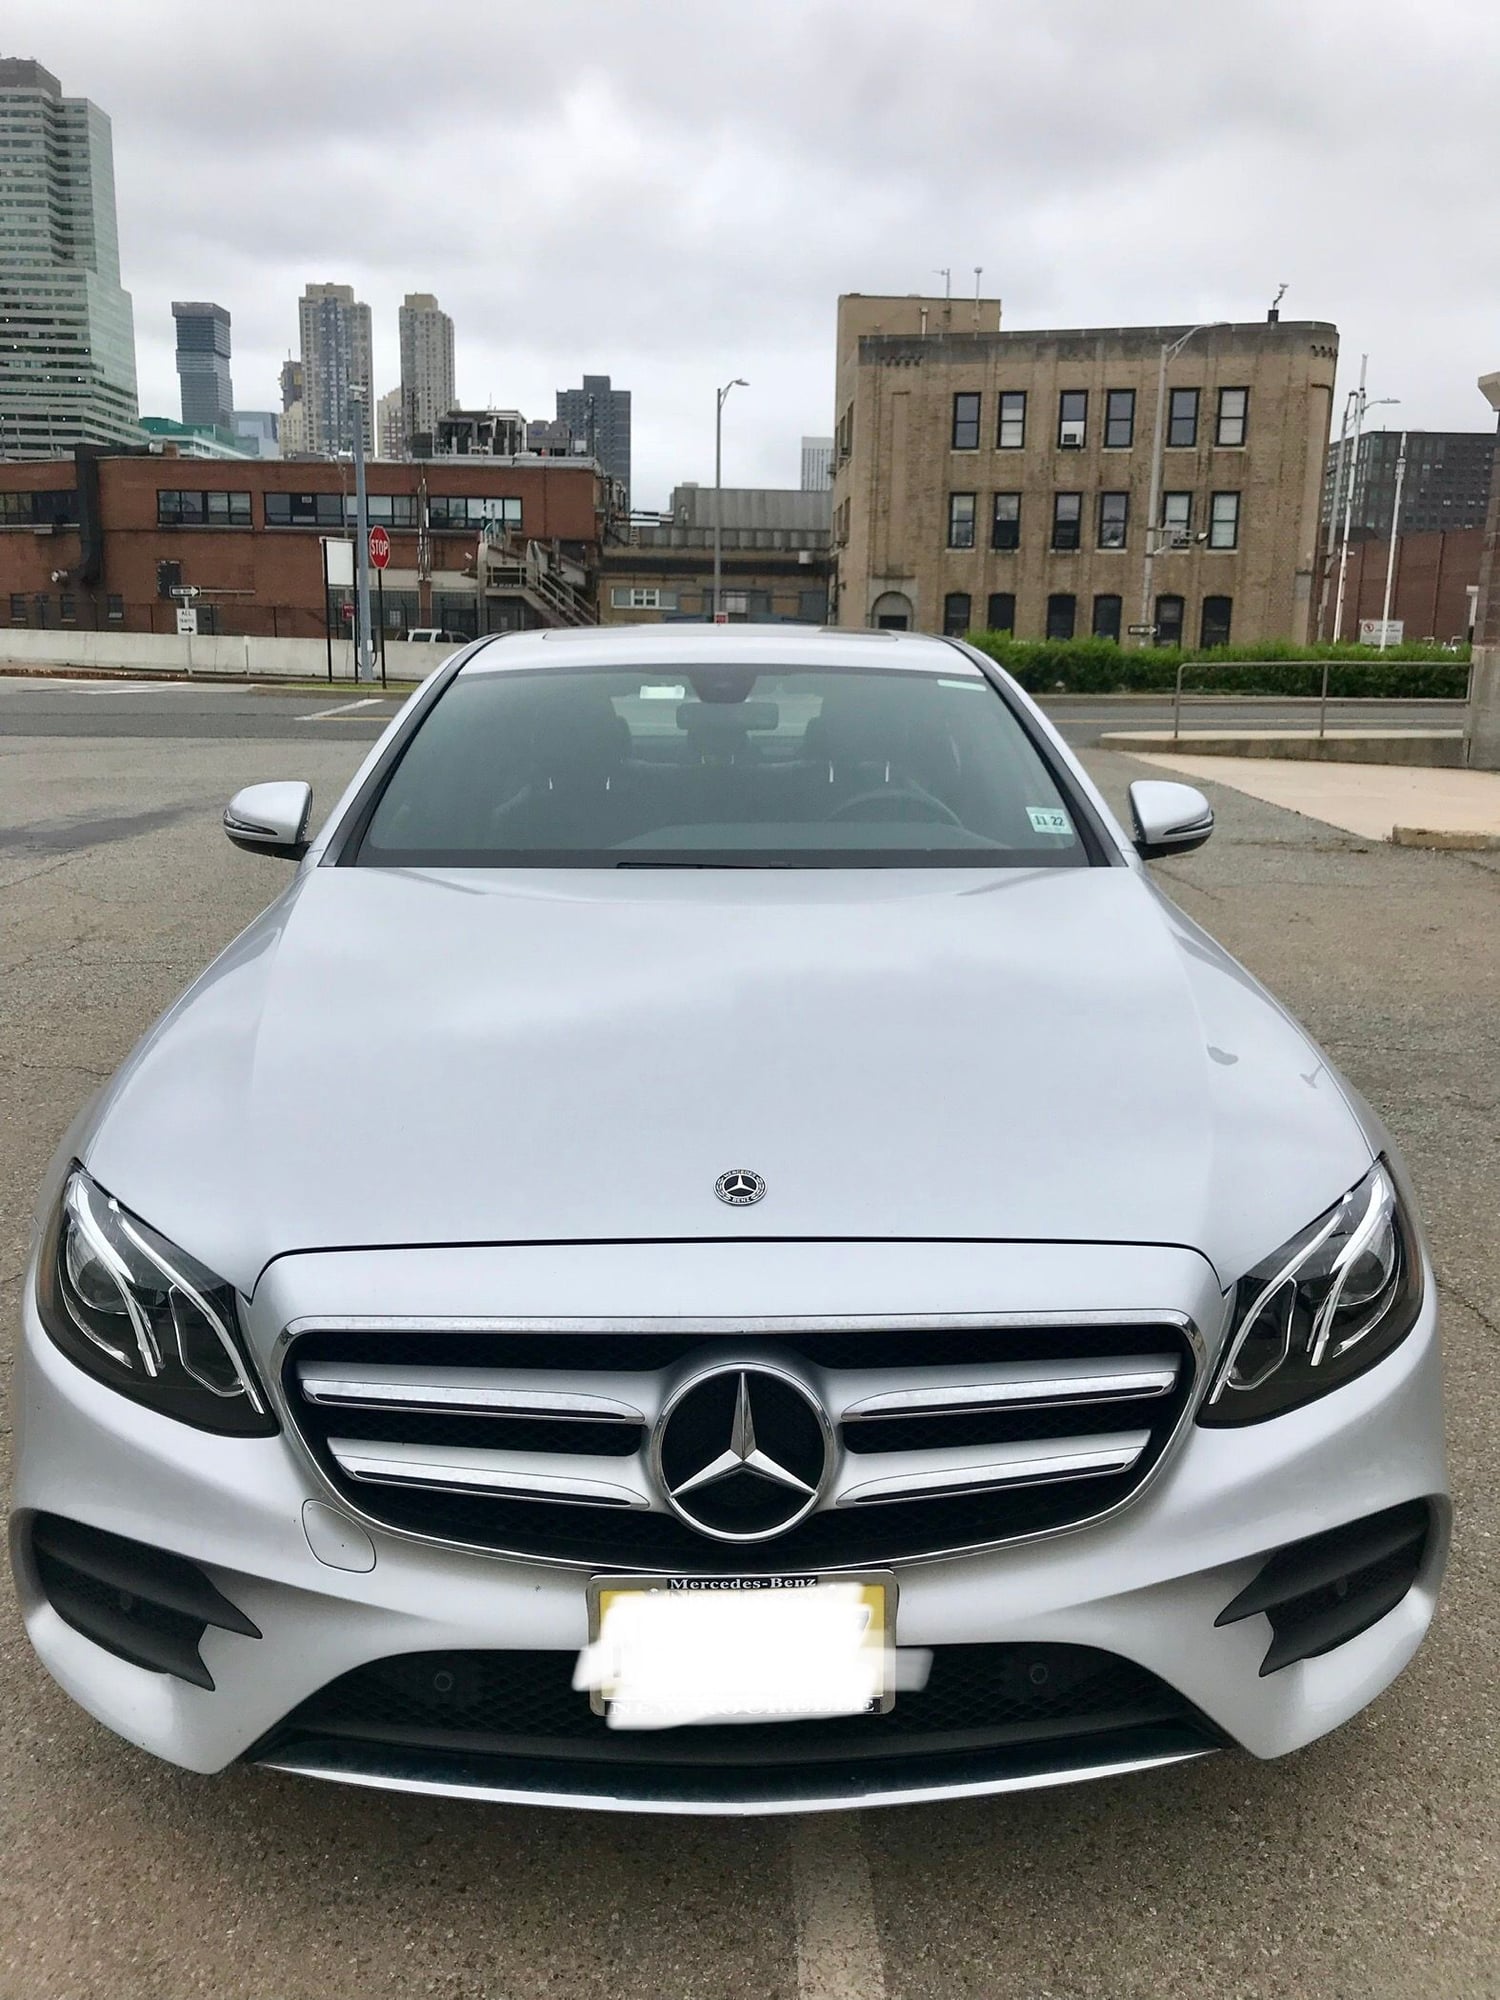 2017 Mercedes-Benz E300 - Mercedes 2017 E300 4MATIC Sedan, Lease transfer 500/month, NYC area - Used - VIN WDDZF4KB2HA228508 - 6,500 Miles - 4 cyl - 4WD - Automatic - Sedan - Silver - Jersey City, NJ 07310, United States